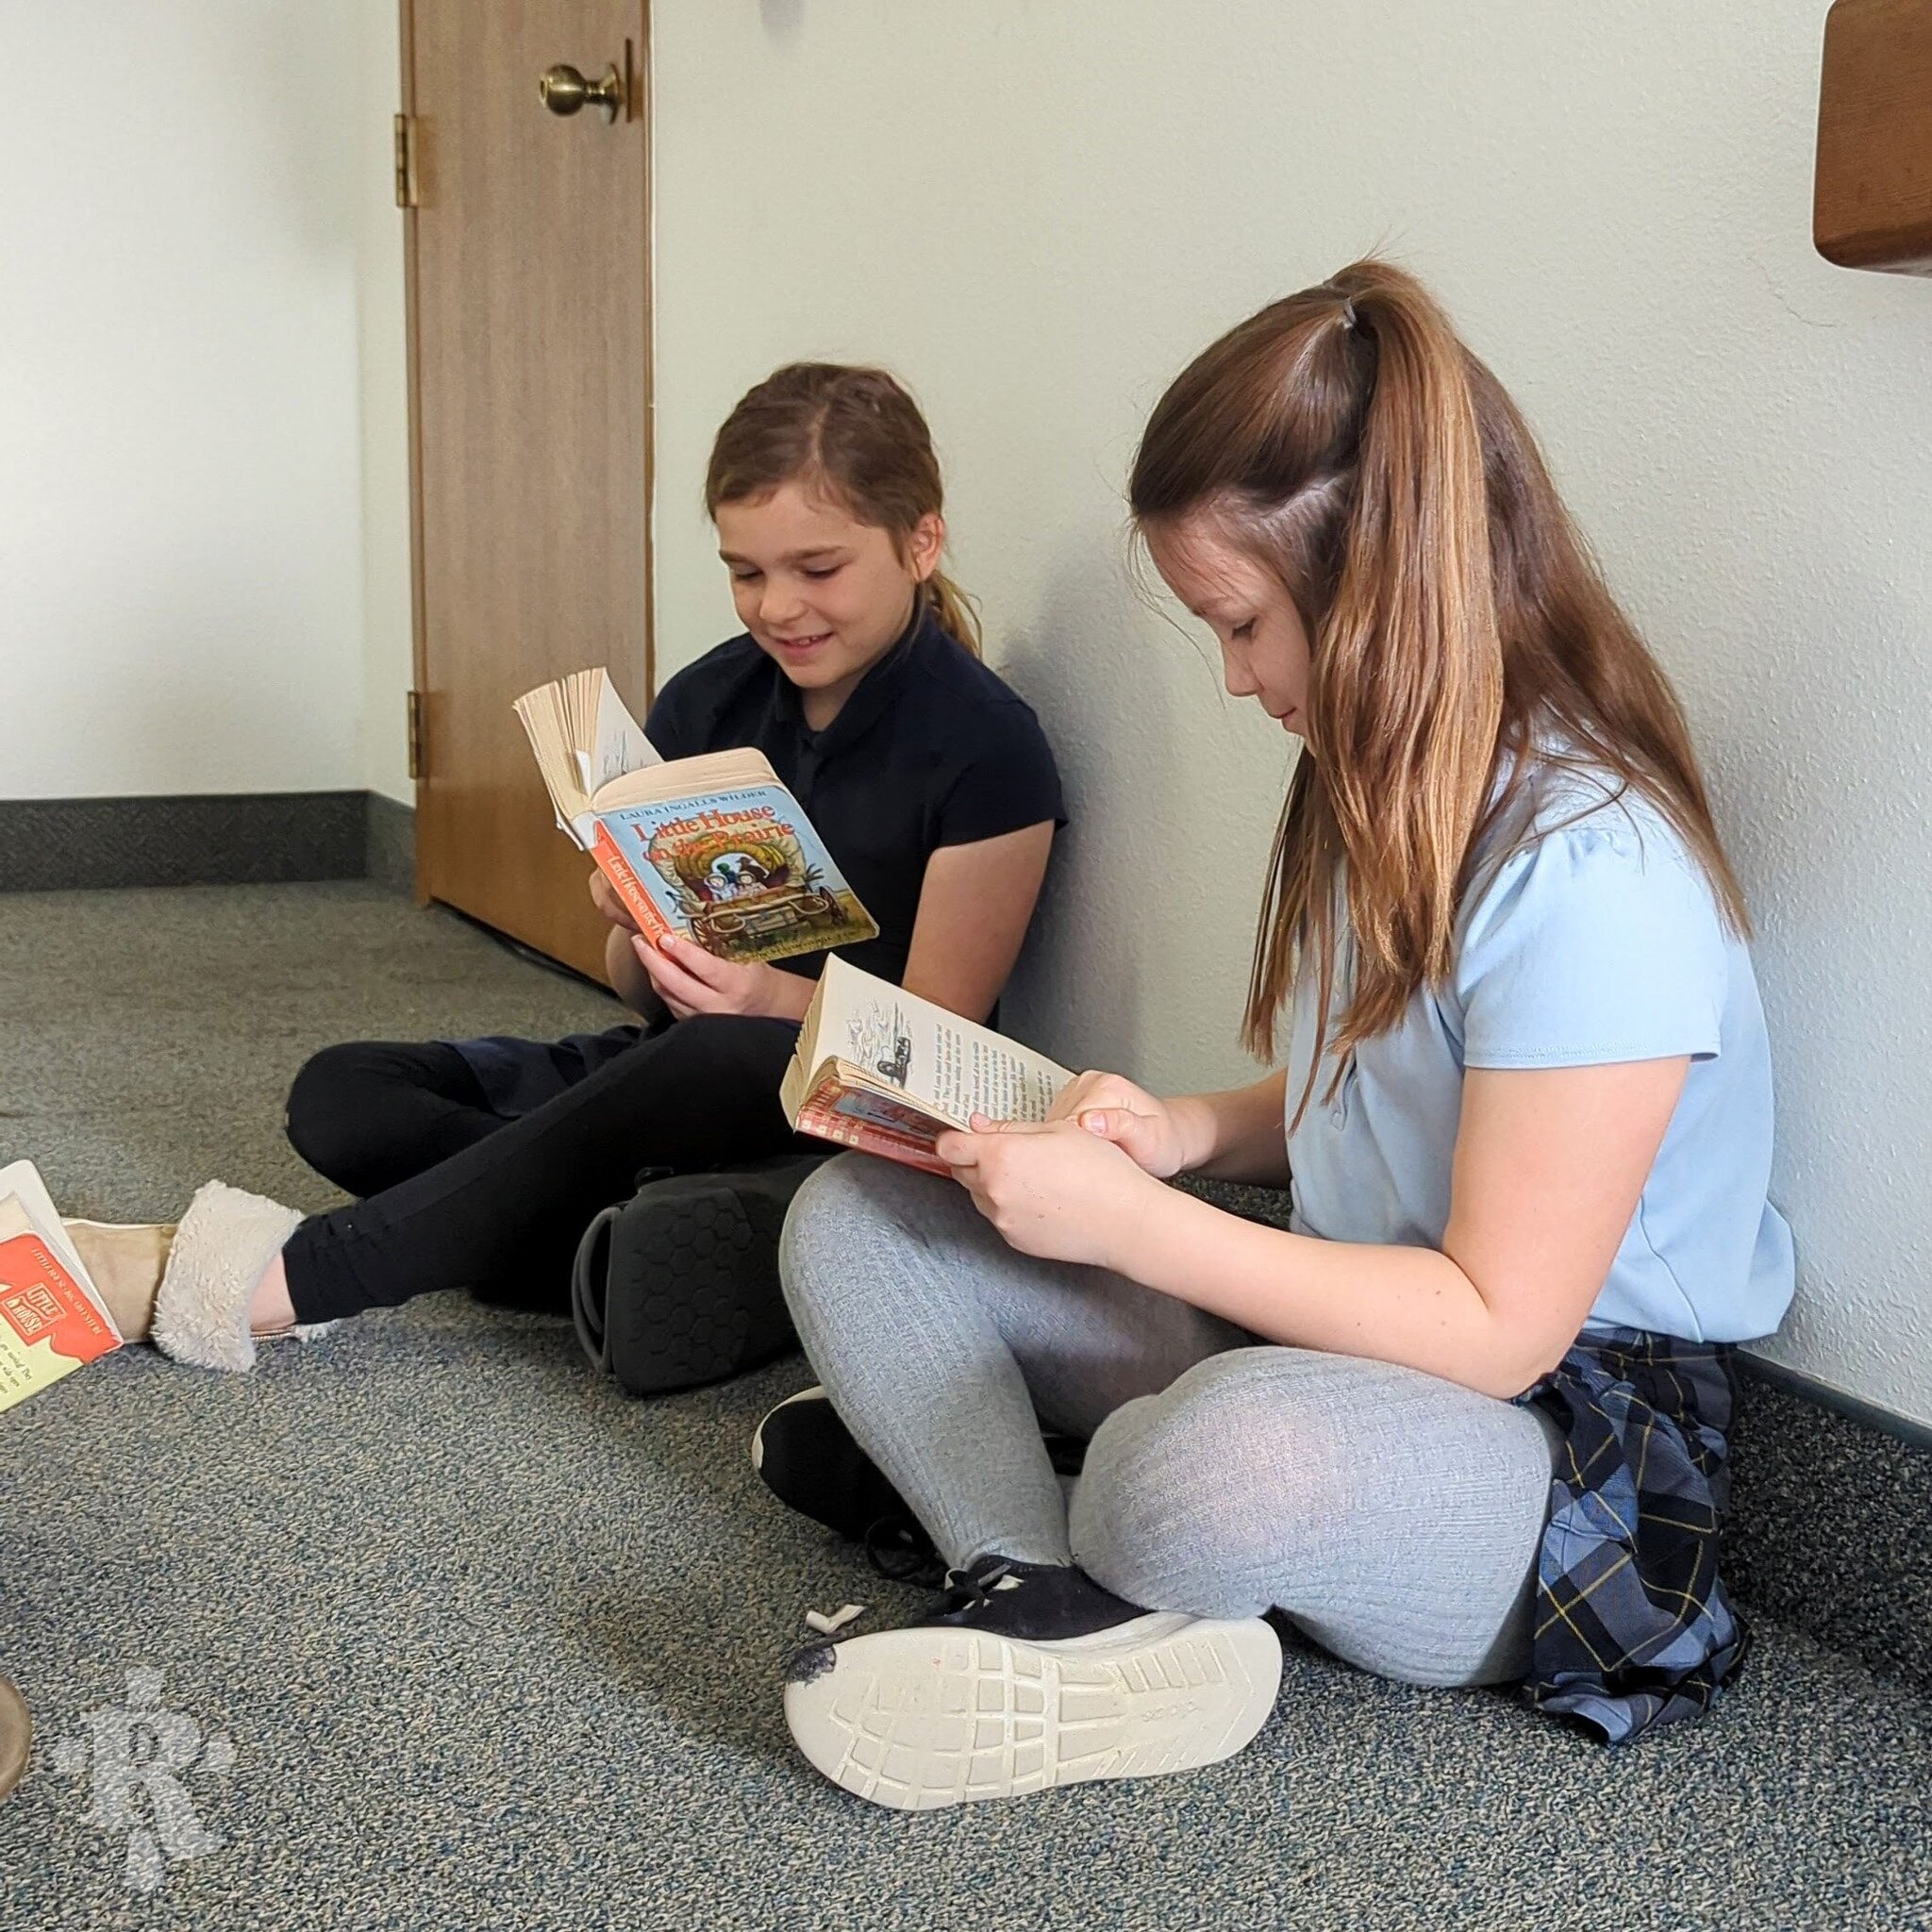 We have some amazing readers in the house! Our students get a lot of practice reading at school by themselves, with their teachers, and with their fellow students. Reading with their peers gives them an opportunity to help each other along difficult 